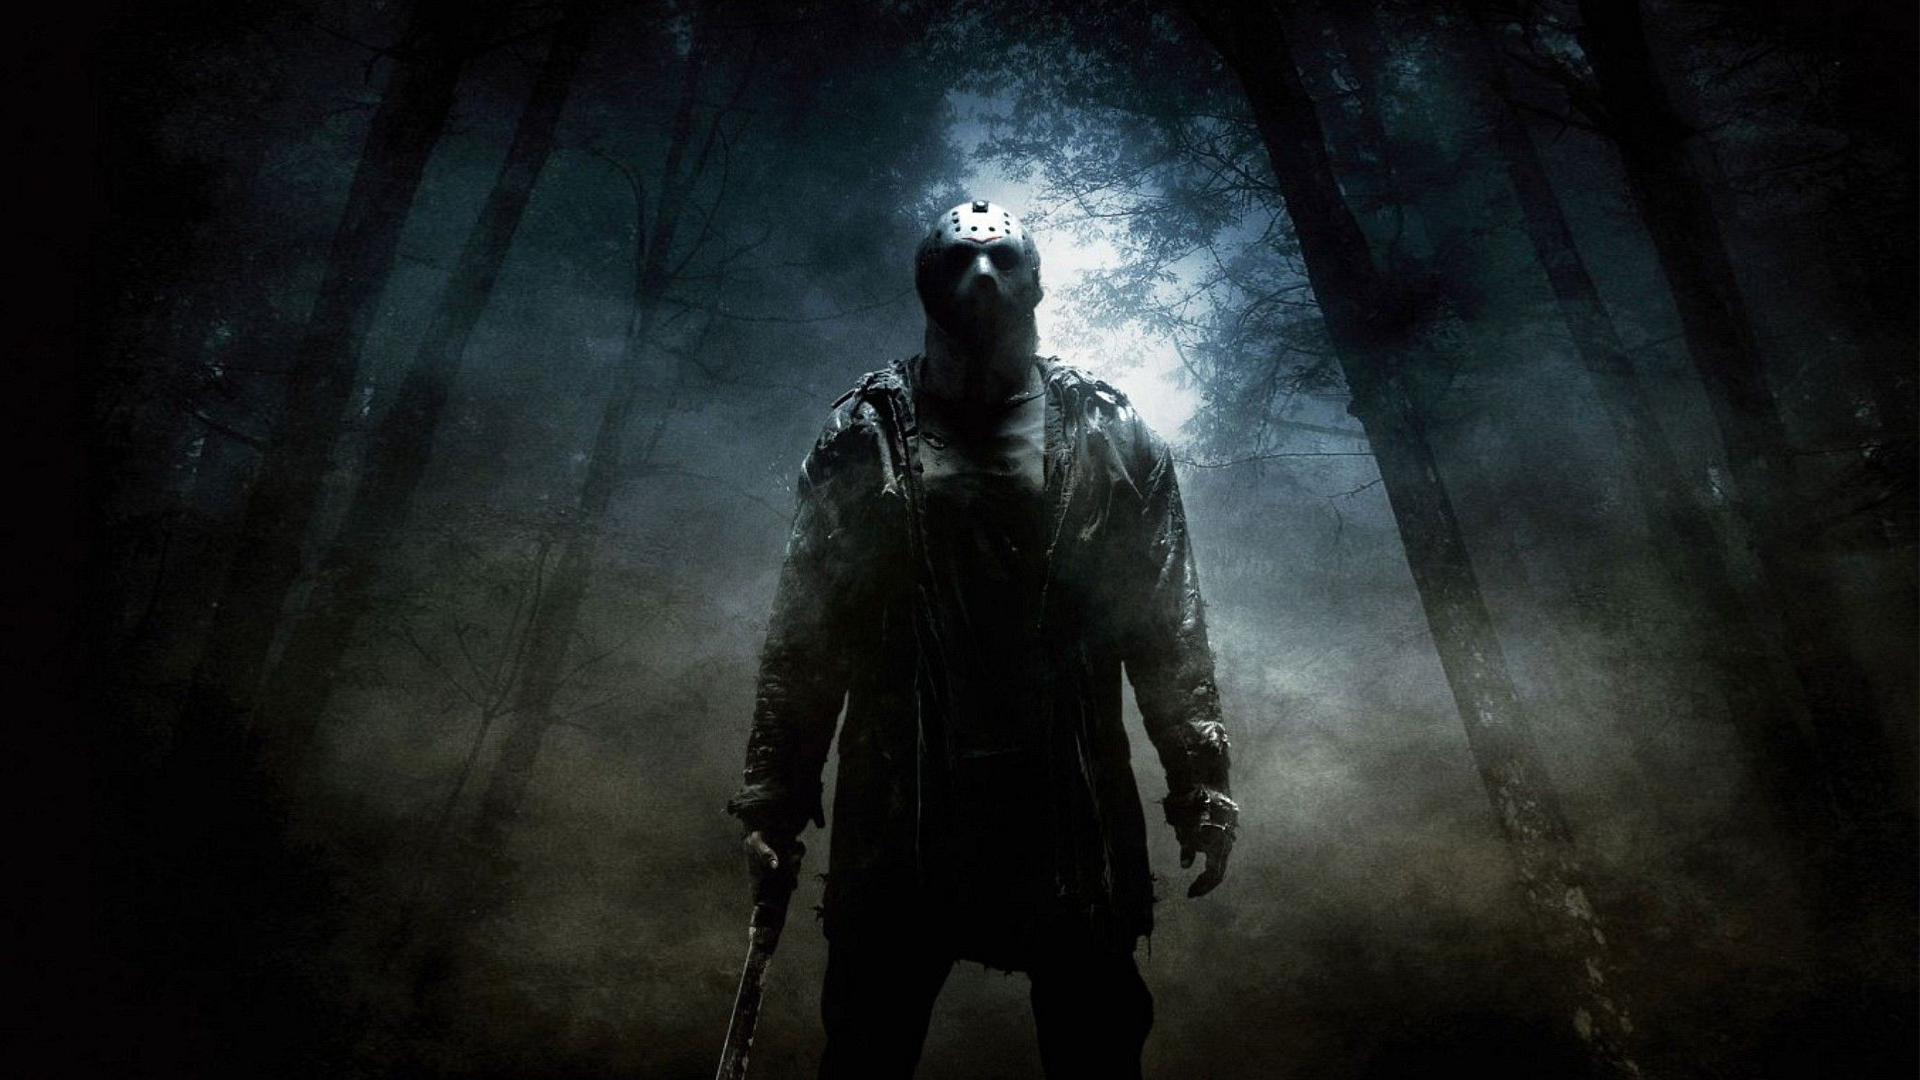 New FRIDAY THE 13TH Game Planned — GameTyrant